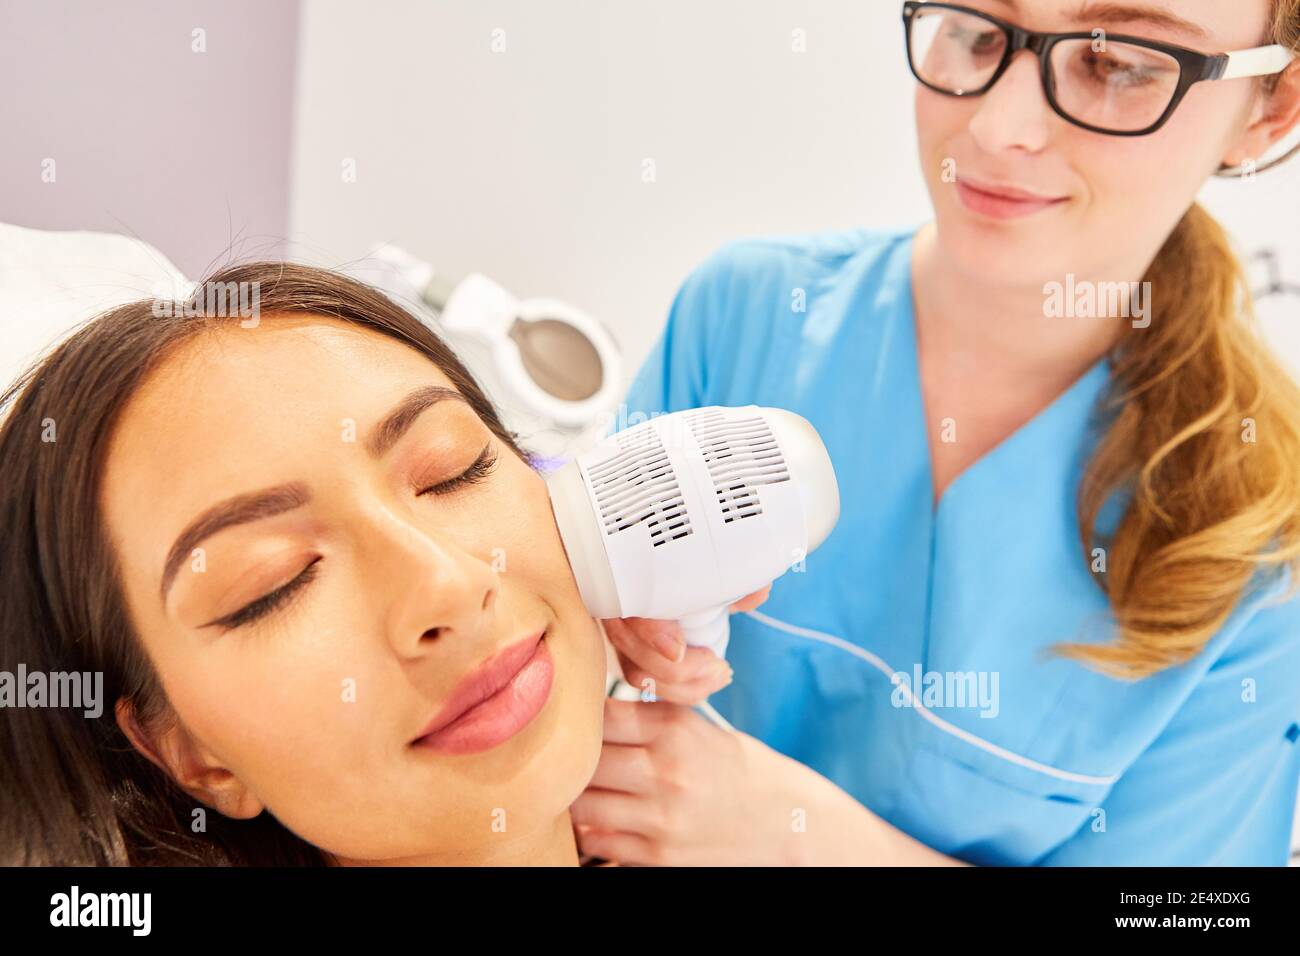 Skin tightening on a woman's face using radio frequency to create collagen in the skin Stock Photo